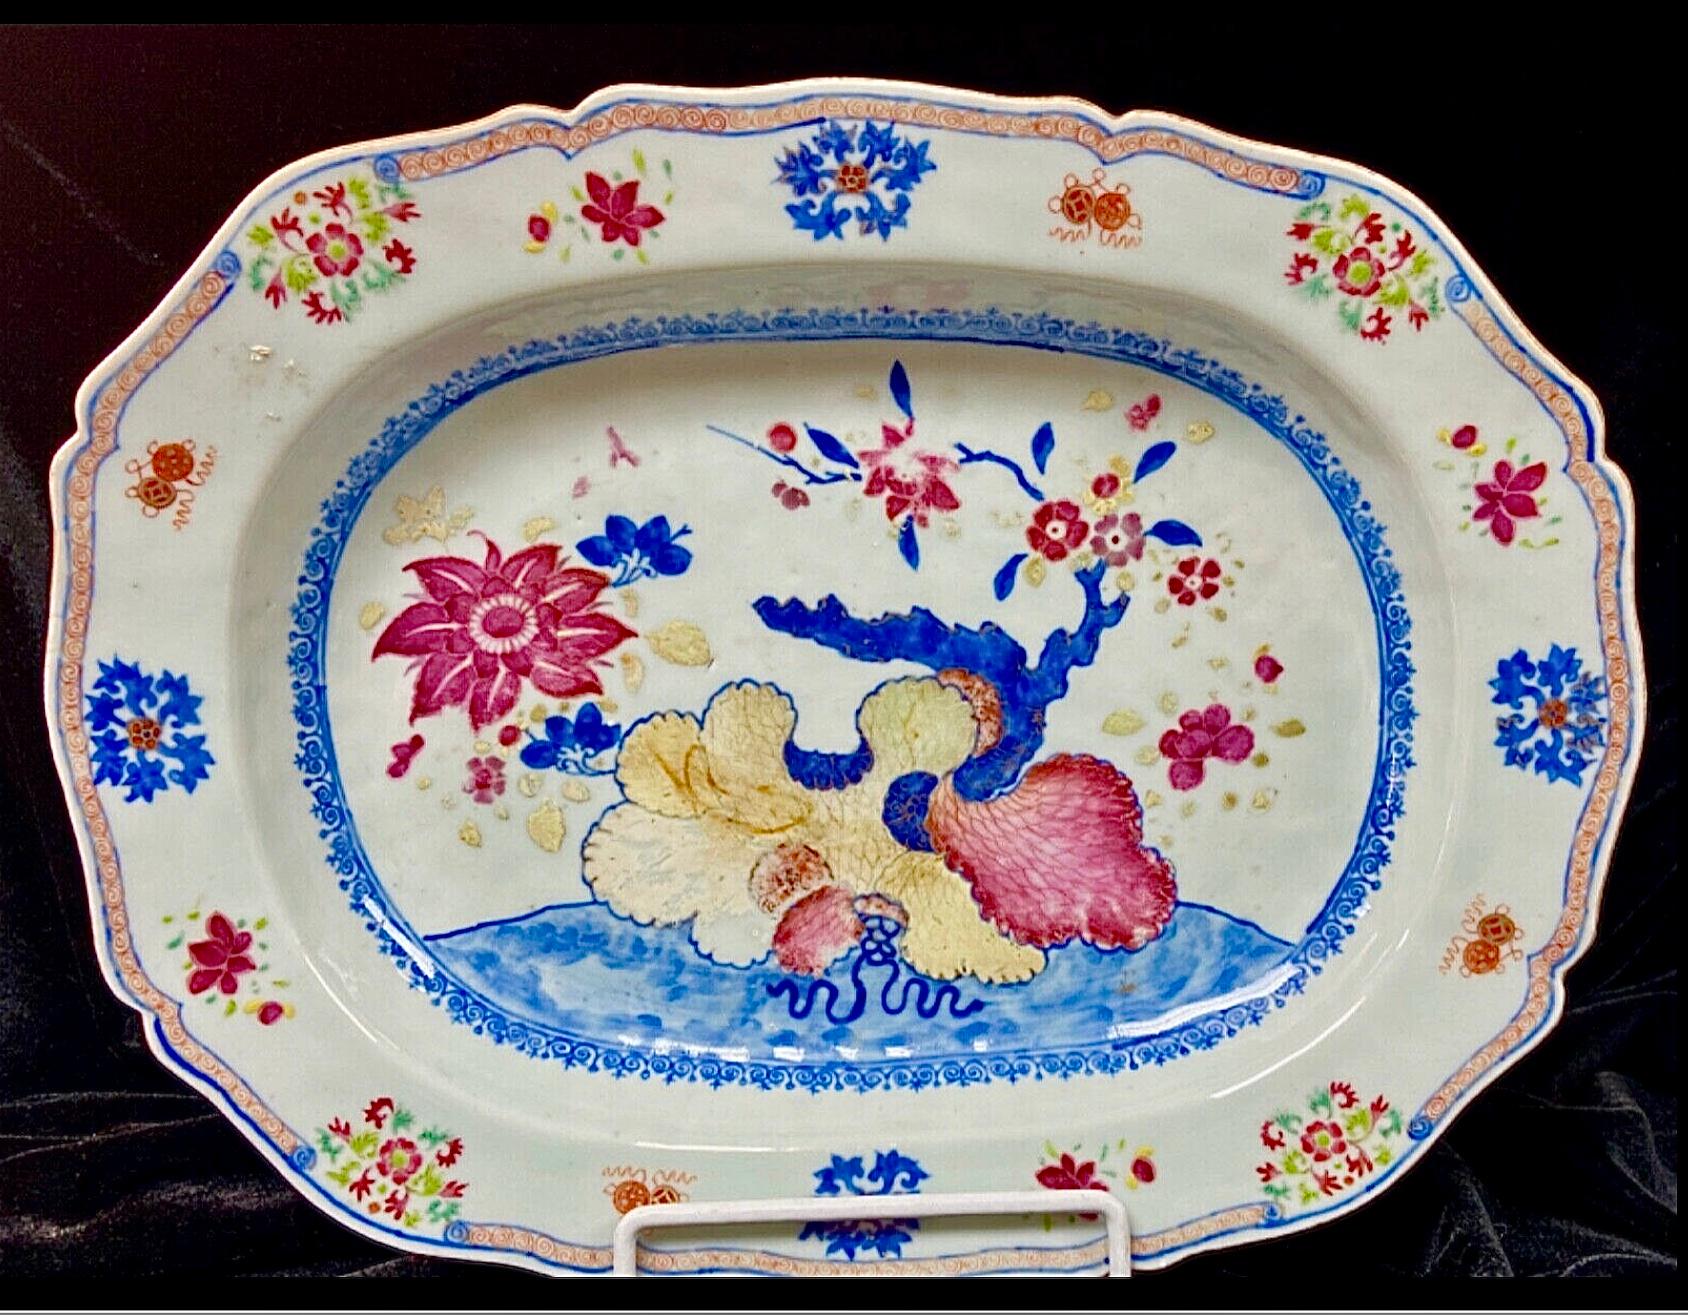 A large Chinese Export Famille Rose charger with pink lotus and other flowers. Painted in bright vivid colors of blues, reds and yellow accents.